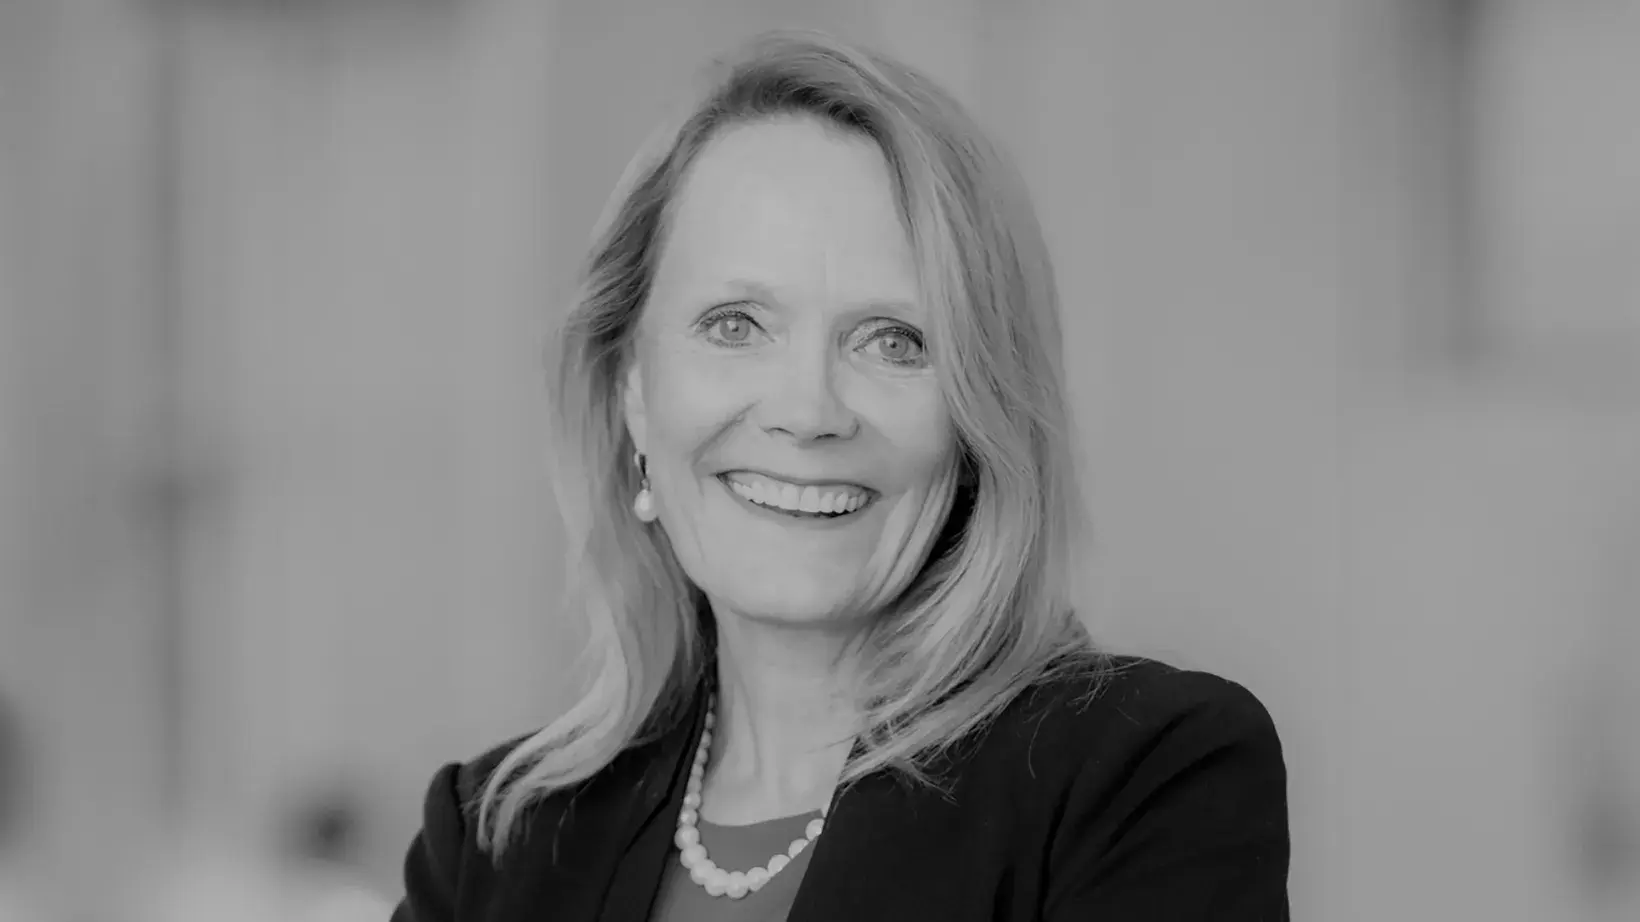 black and white portrait of Sharon Tucker, PhD smiling, wearing a dark suit coat and pearl necklace